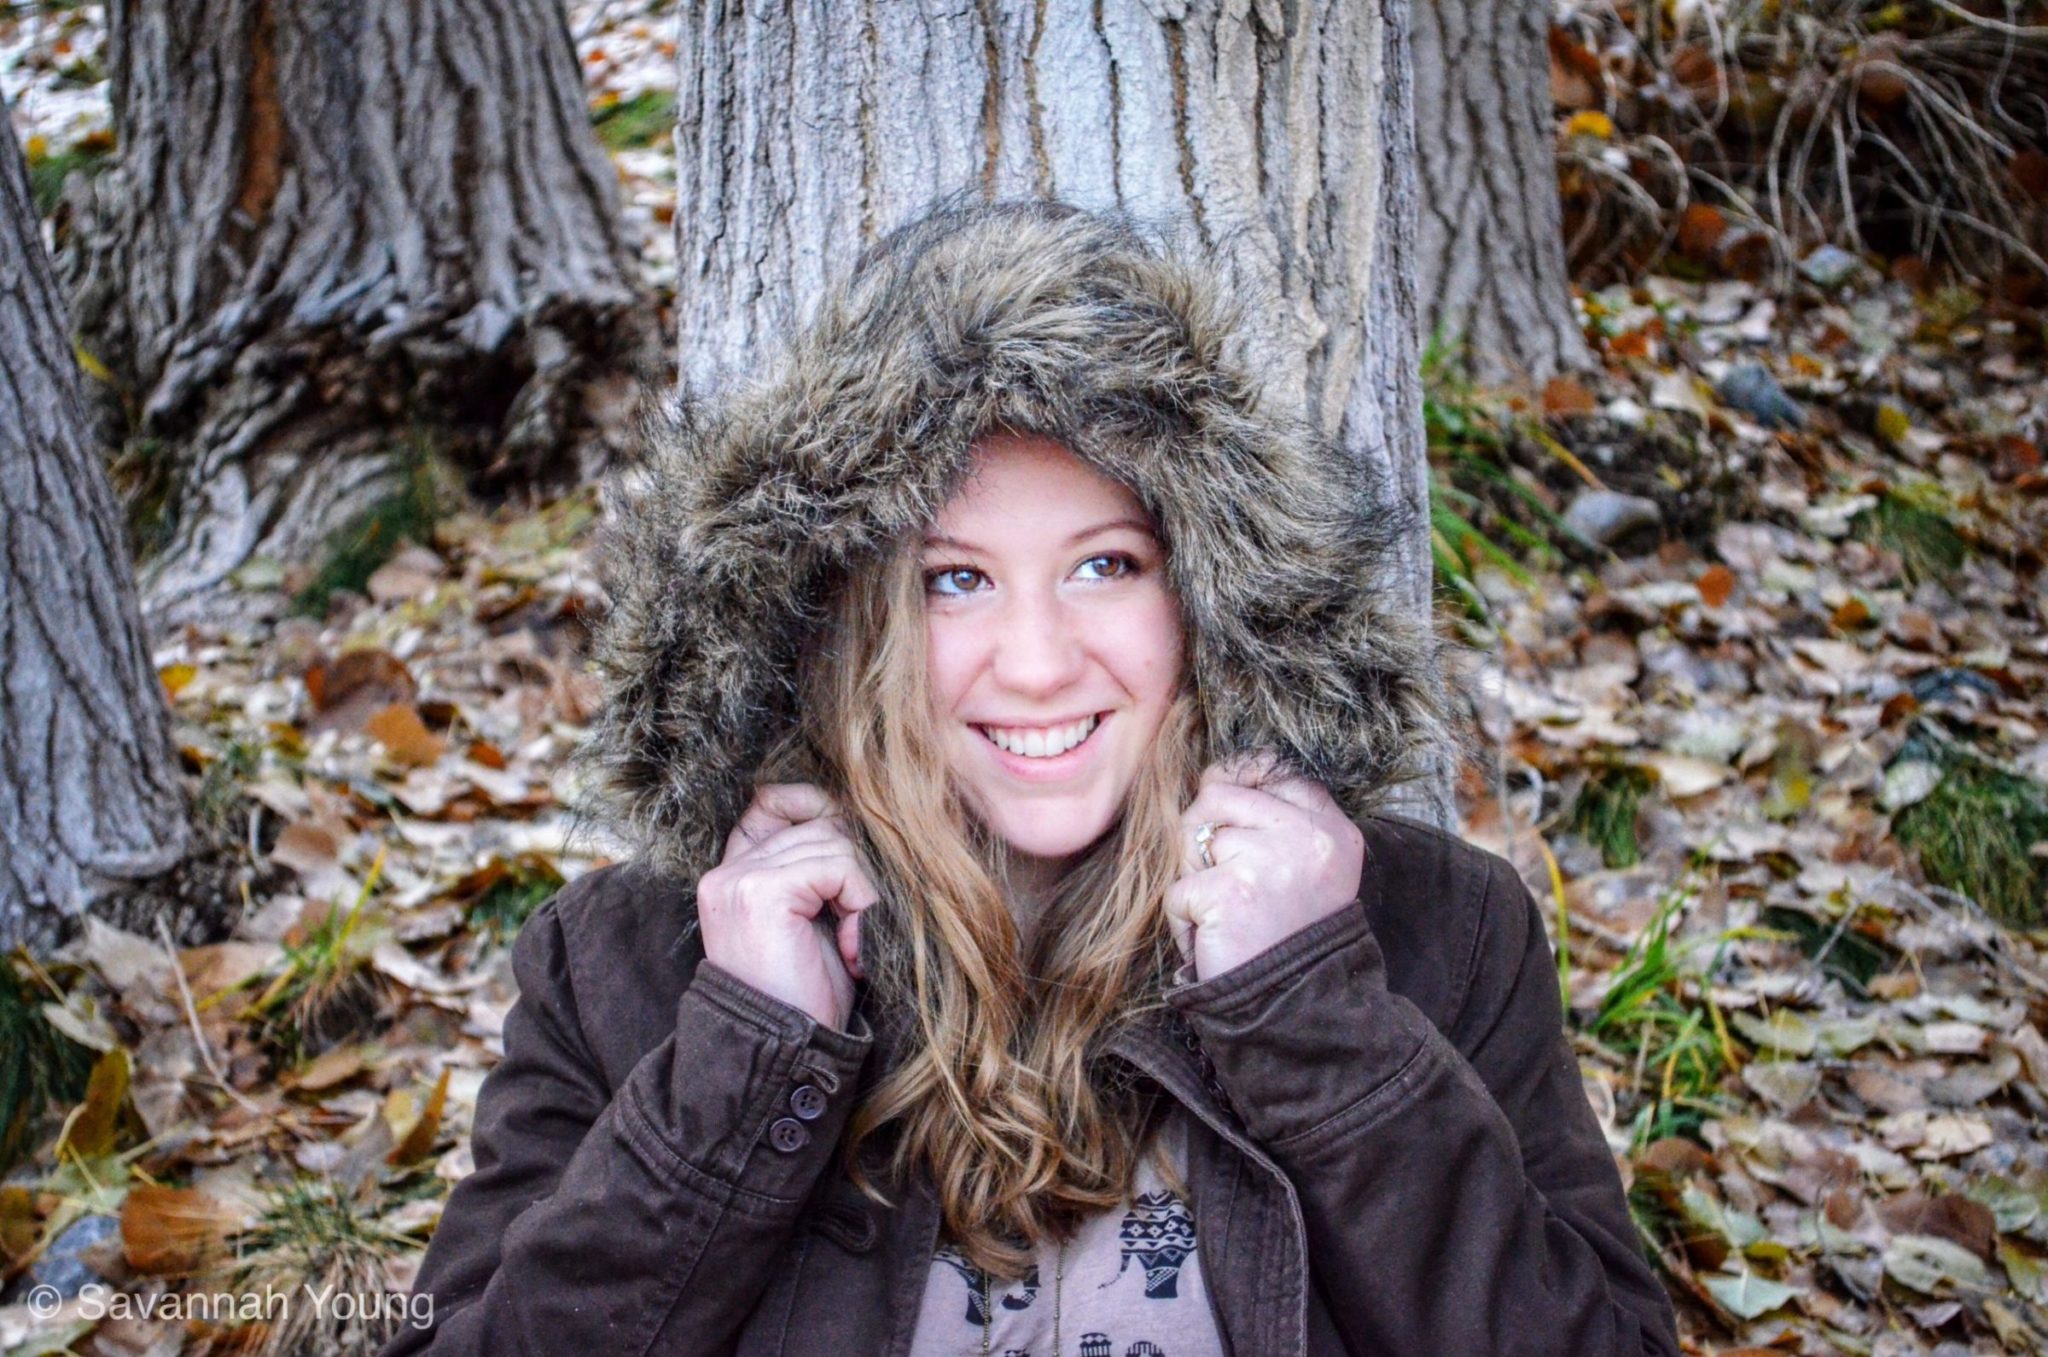 Savvy Leigh Photography. Alison in the forest trees with a fuzzy fur hood on her coat. She is smiling and looking beautiful. Taken in Provo, Utah Wedding Photographer.